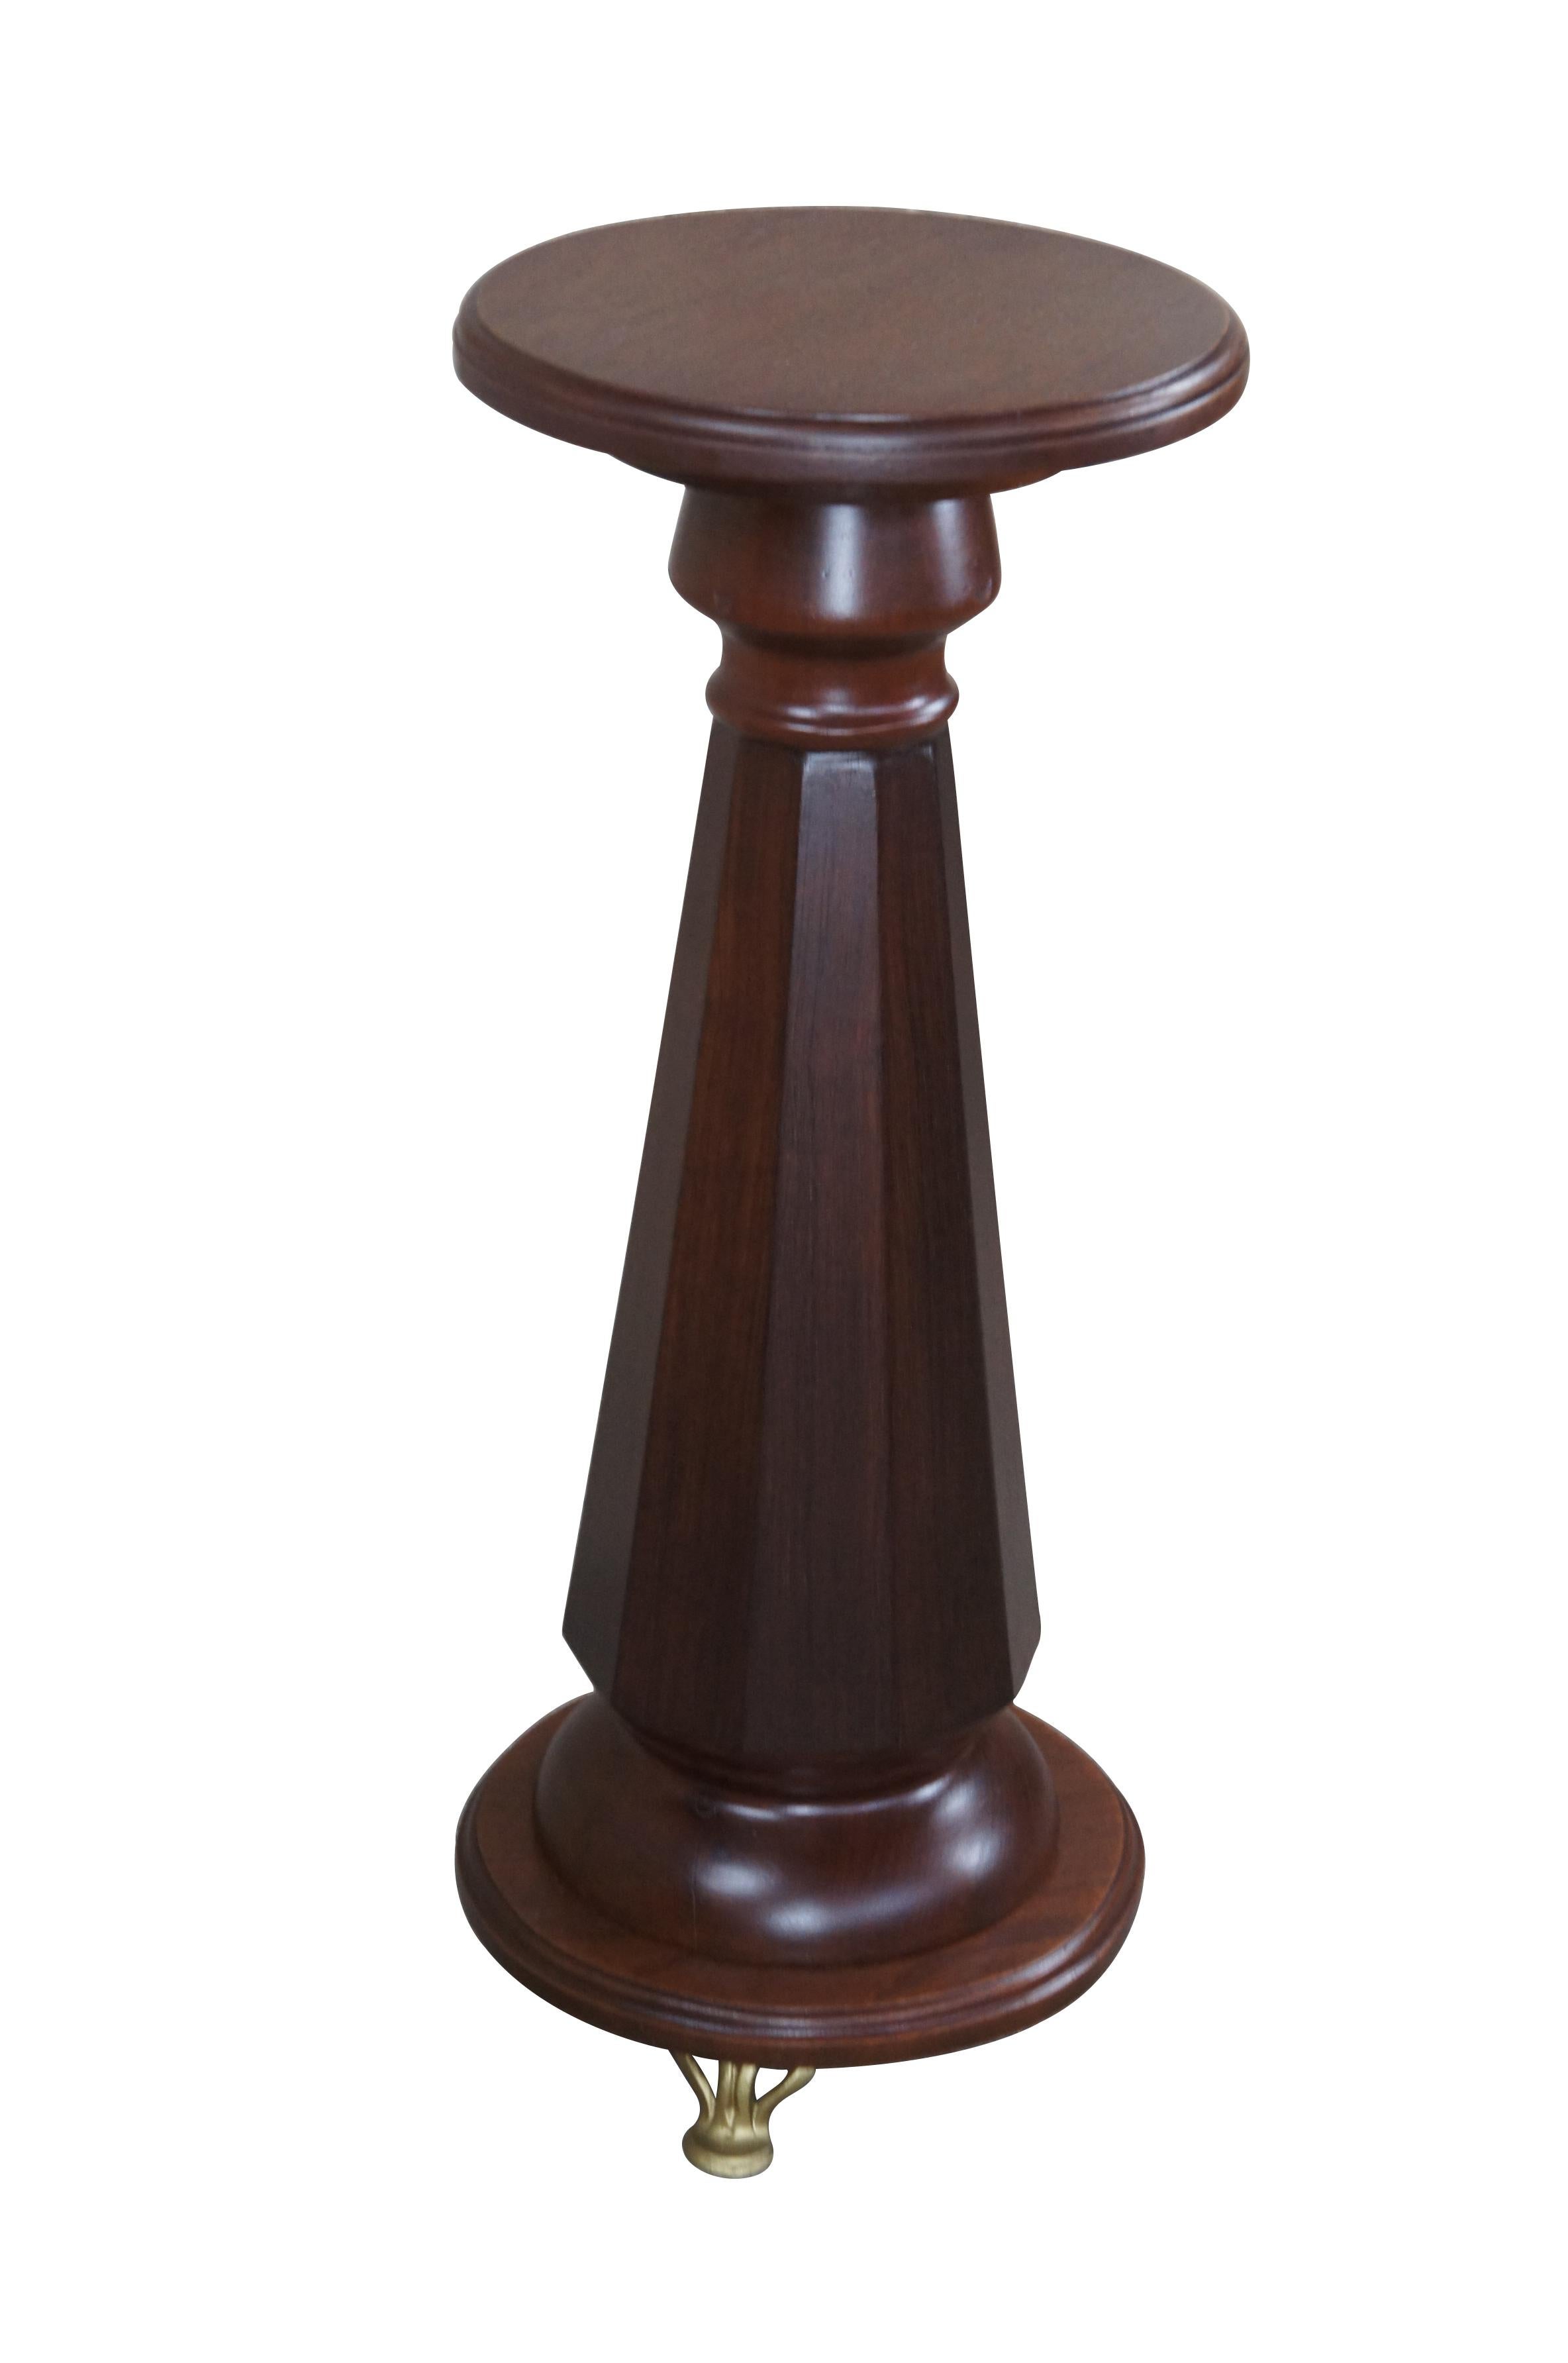 An American Empire style sculpture pedestal or plant stand, circa last half 20th century.  Features  an rounded top over a faceted graduated column leading to a rounded brass footed base.   

Dimensions:
28.5